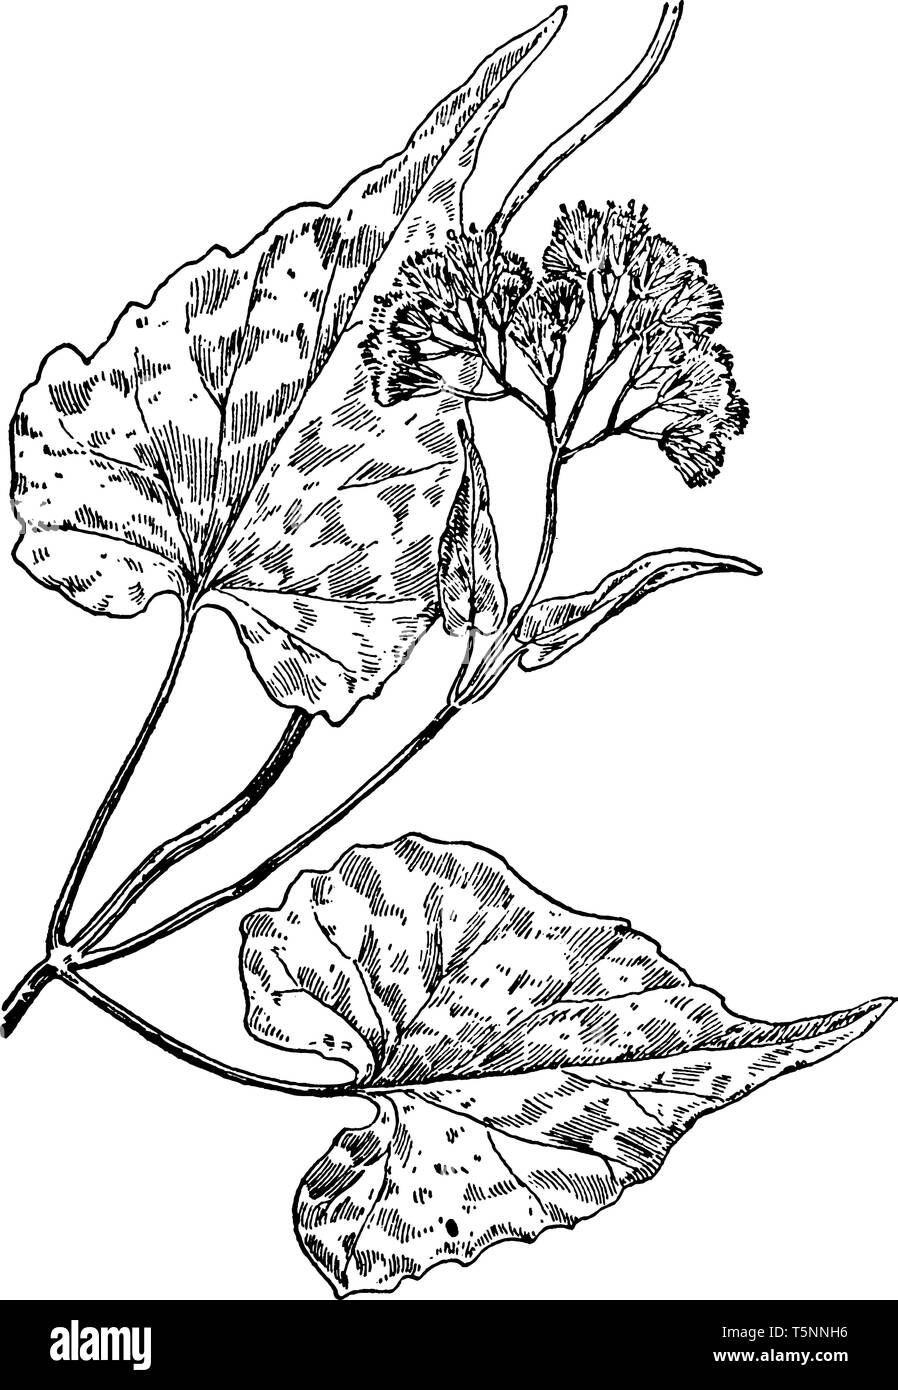 This Boneset species grows as a vine. The leaves are oppositely arranged on stem node, and have heart shaped leaves. The flower's inflorescence is clu Stock Vector